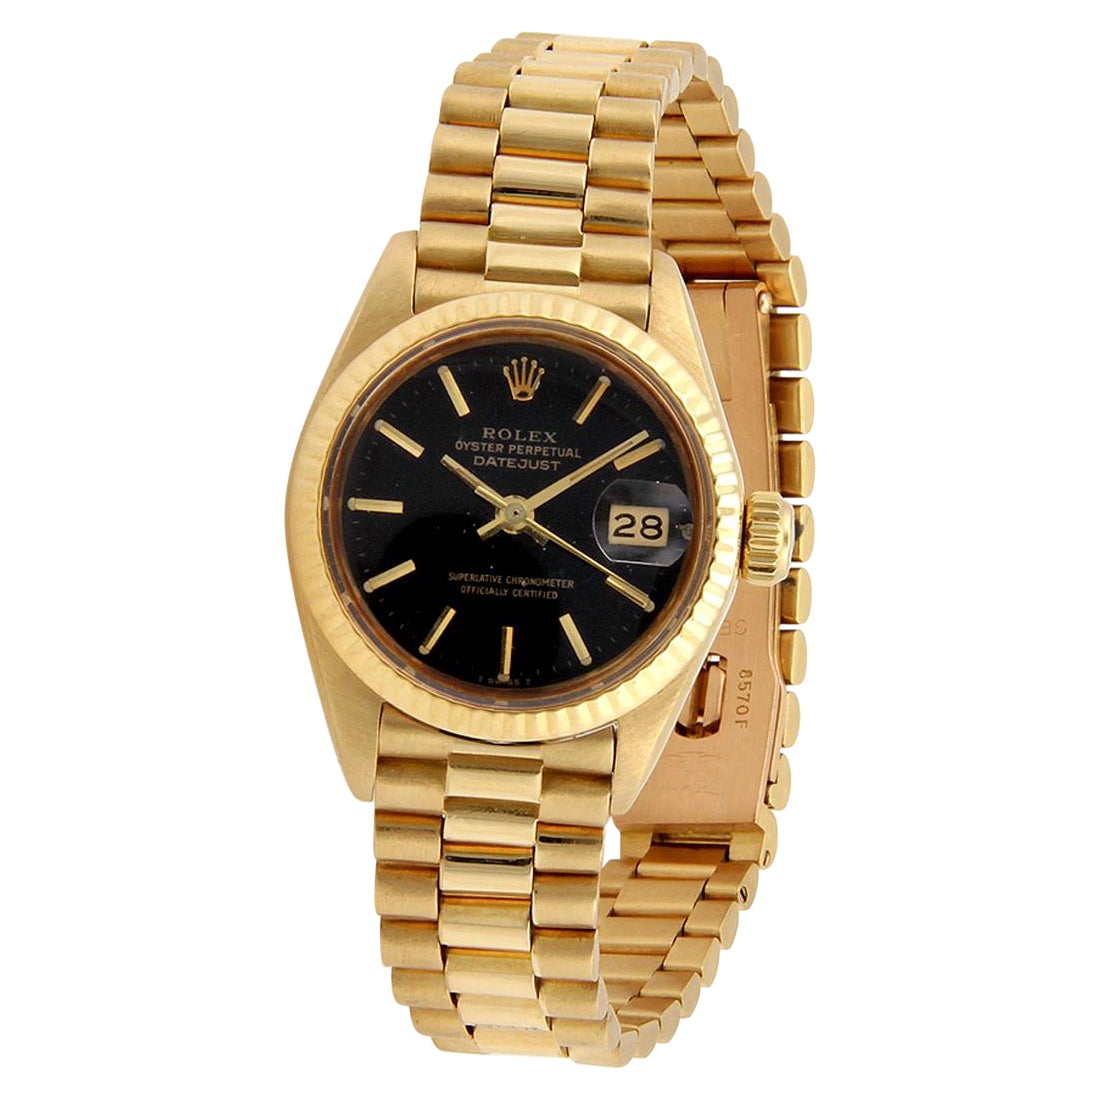 Rolex Oyster Datejust Automatic 18k Gold Black Dial Ladies Wrist Watch 6917